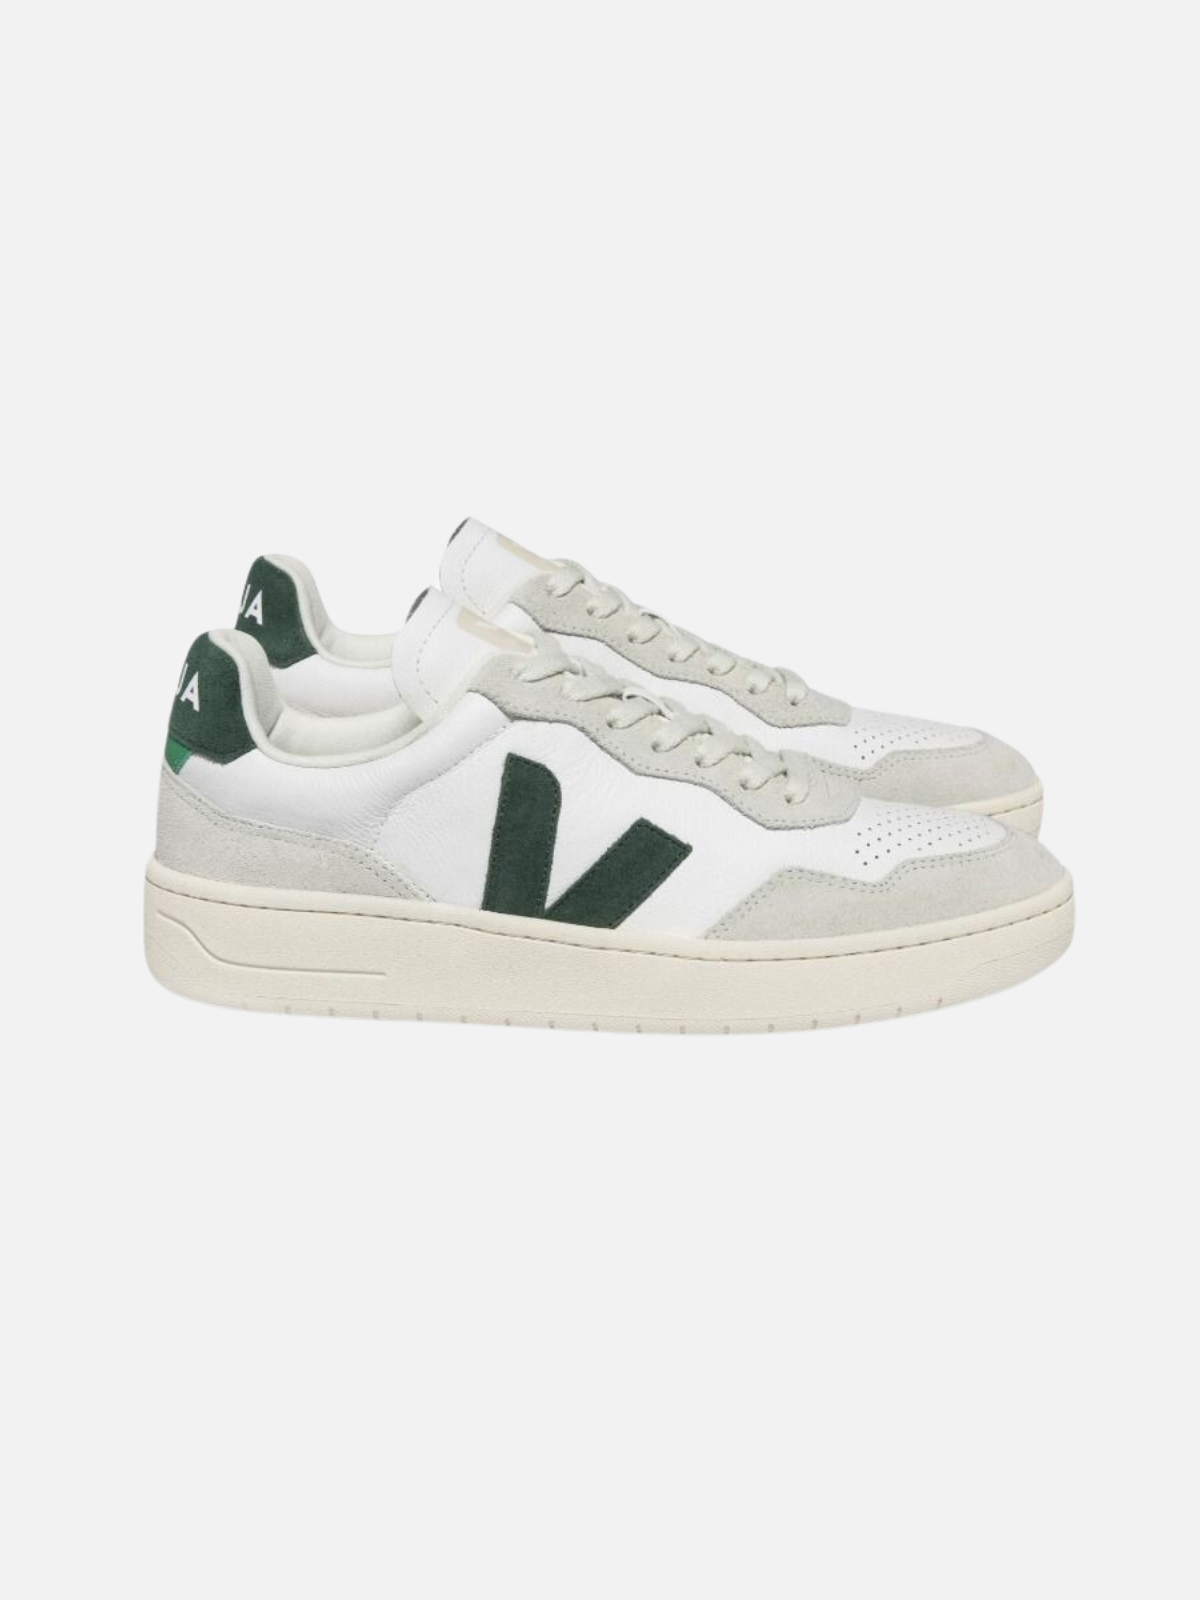 VEJA V90 Sneaker Extra White Cyprus Green Suede Leather Kempt Athens Georgia Mens Shopping Shoes